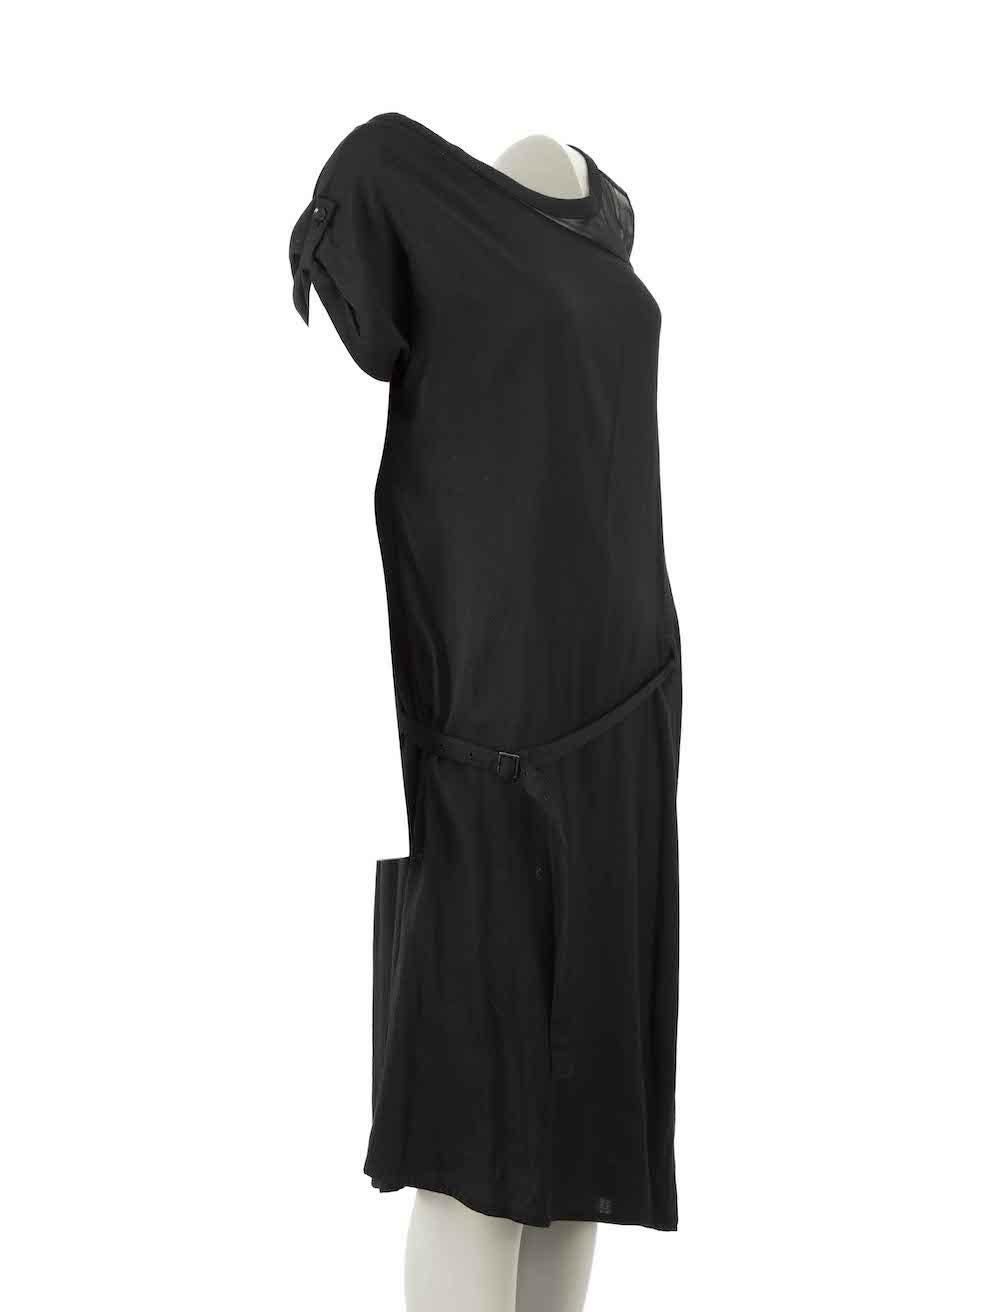 CONDITION is Very good. Hardly any visible wear to dress is evident on this used Y's Yohji Yamamoto designer resale item.
 
Details
Black
Wool
Knee length dress
Round neckline
Single cold shoulder accent
Sheer on shoulder
Belted

Made in Japan
